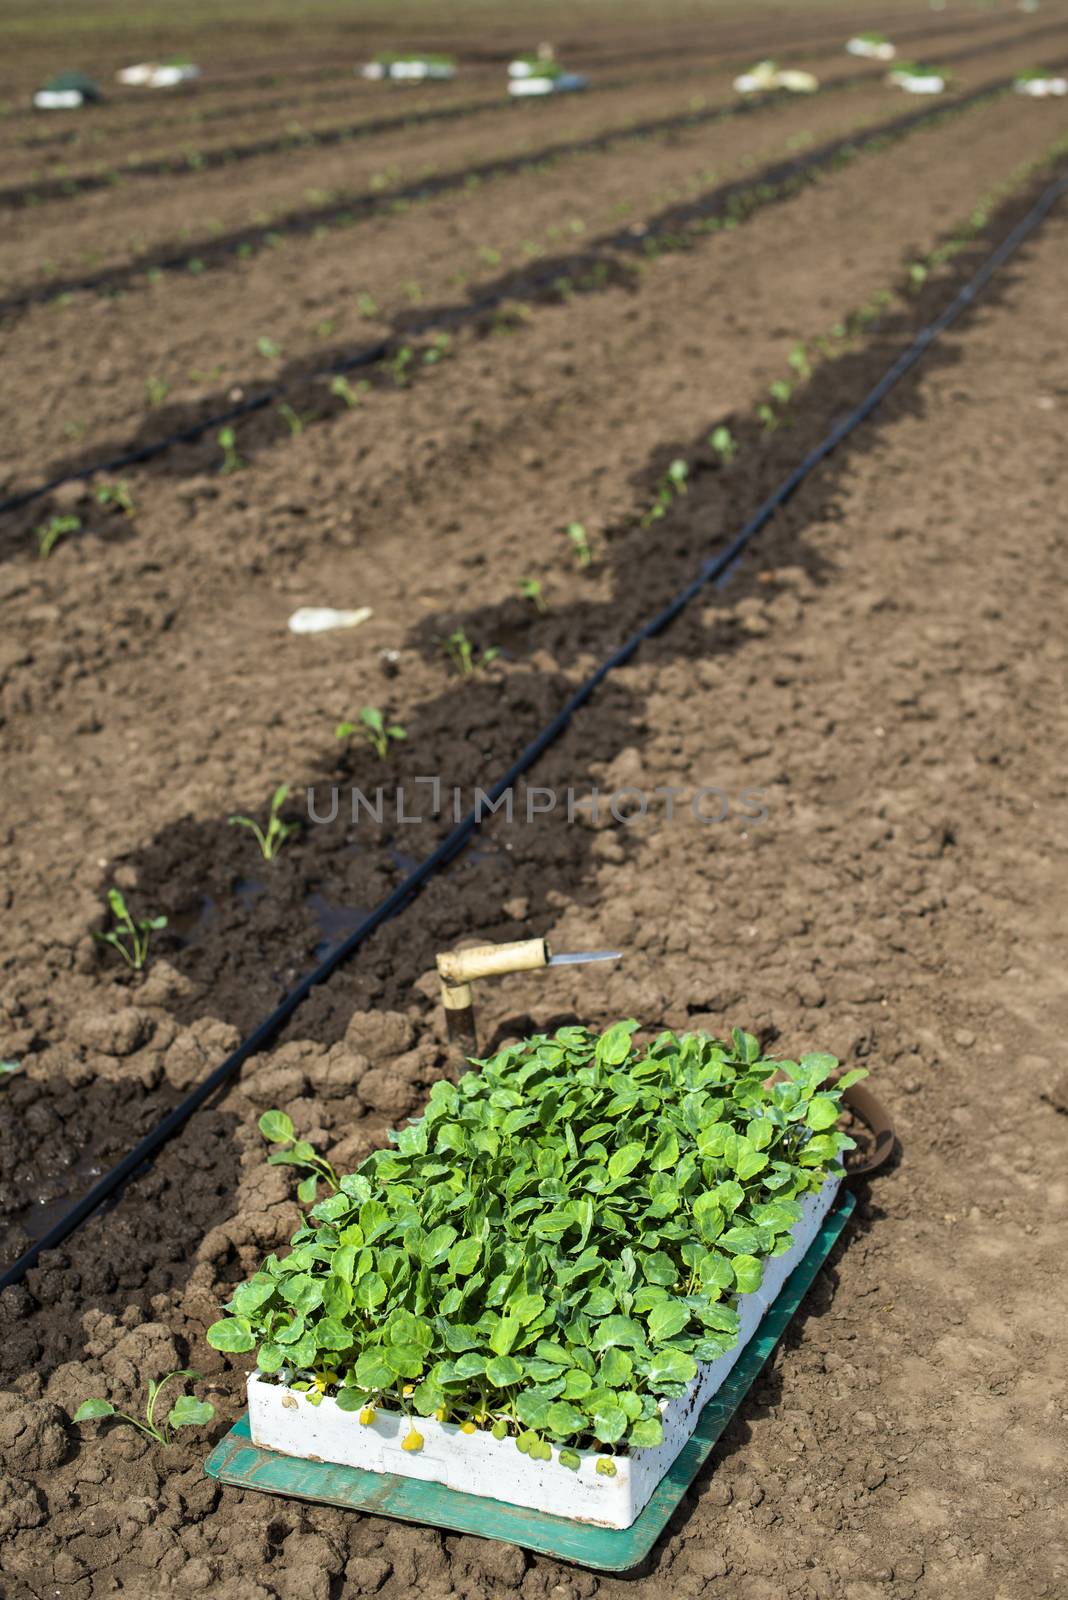 Seedlings in crates on the agriculture land. Planting broccoli i by deyan_georgiev